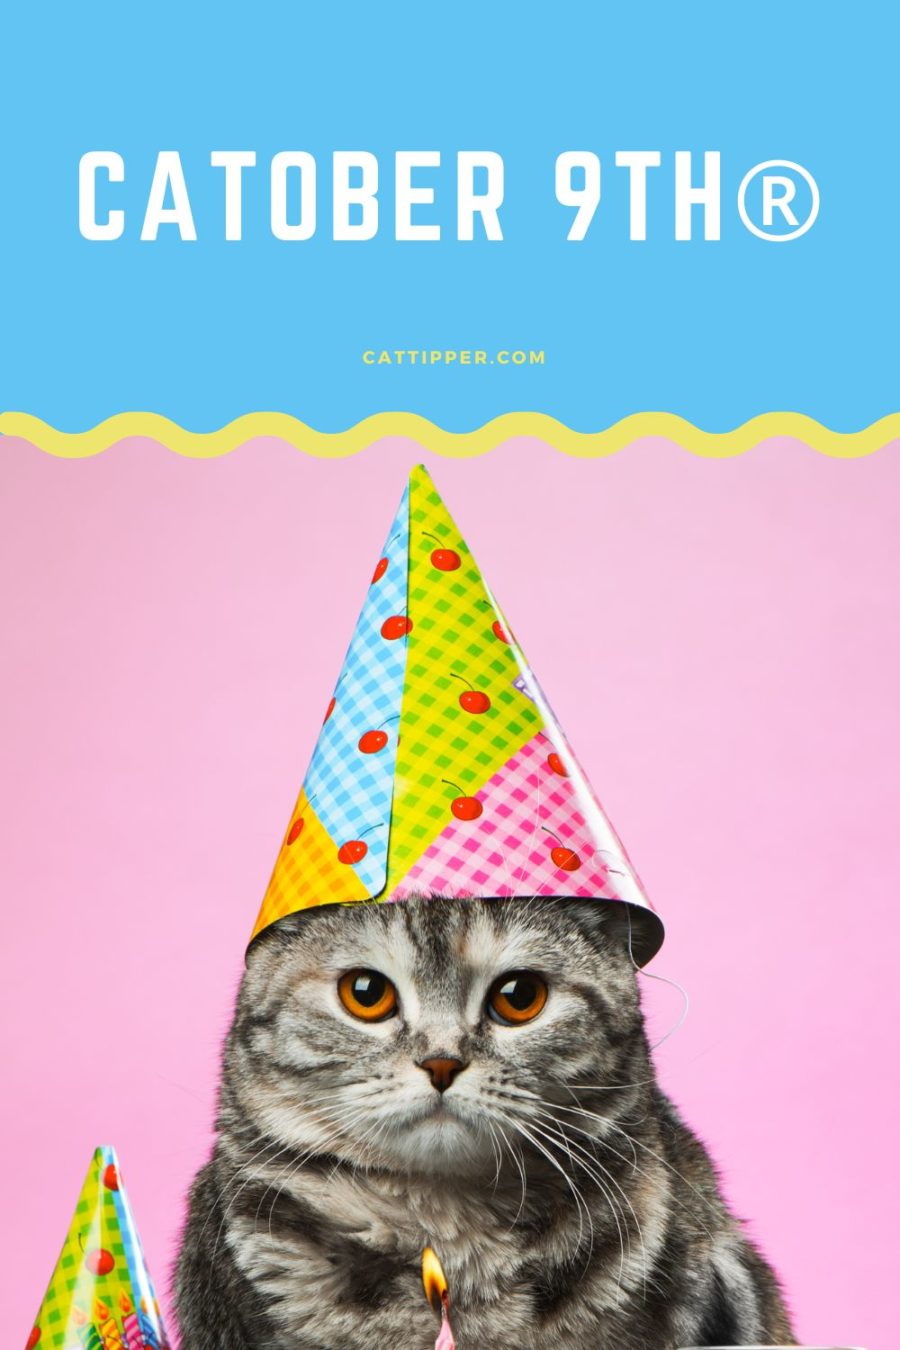 CATober - the universal birthday of shelter cats and cats whose birthday is unknown!